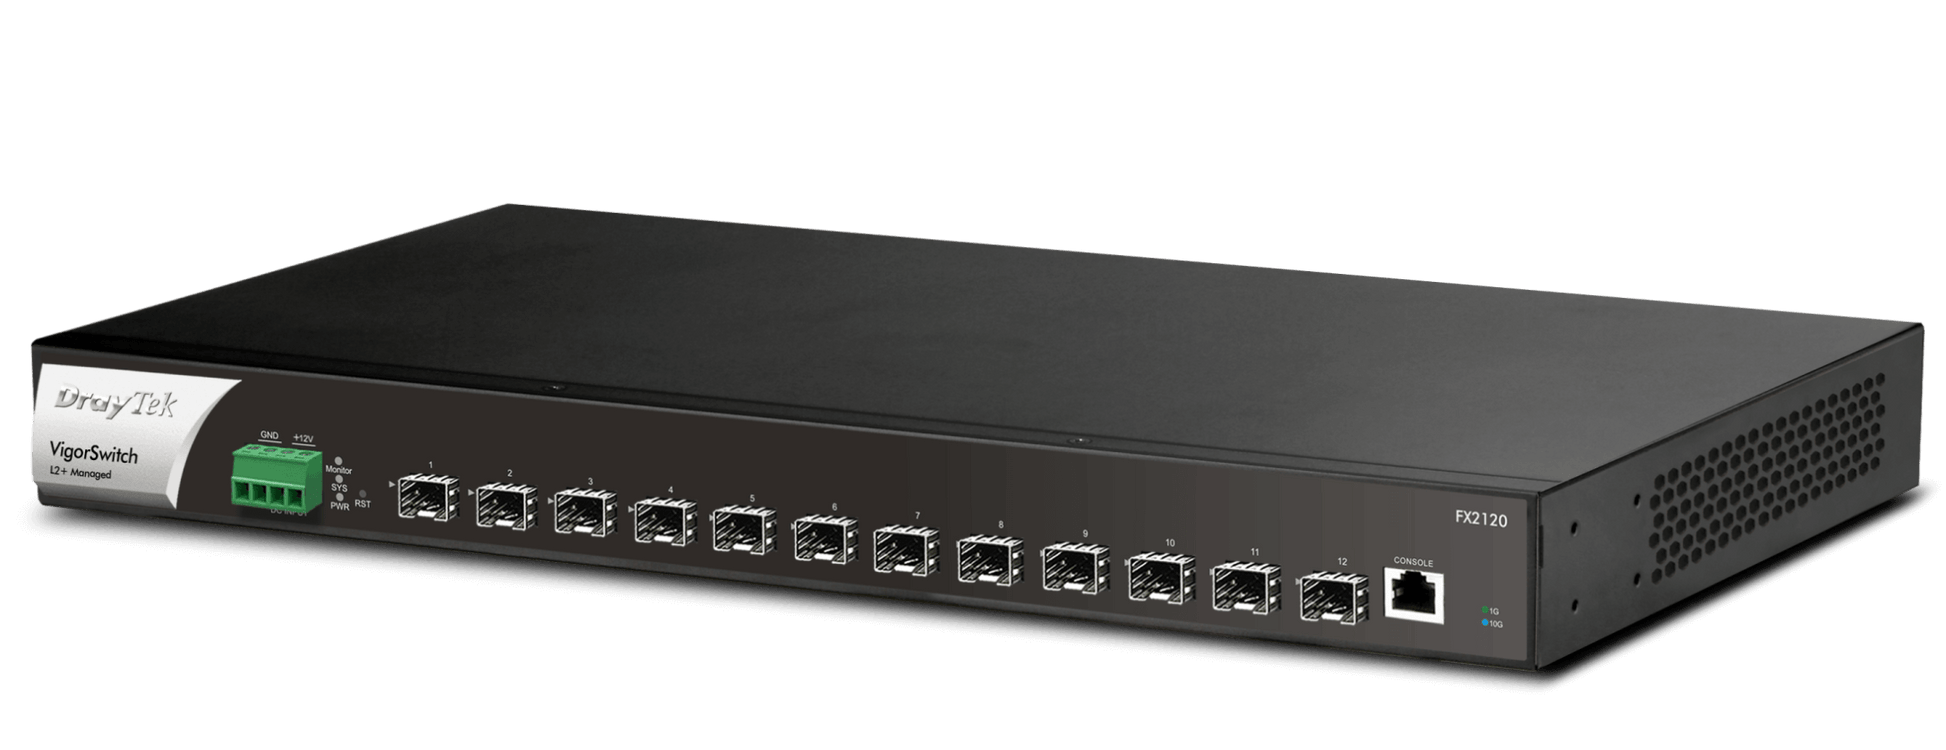 DrayTek VigorSwitch FX2120 Full Fibre 10G Layer 2+ Managed Switch Front View 240GBps Switching Capacity Right View 2